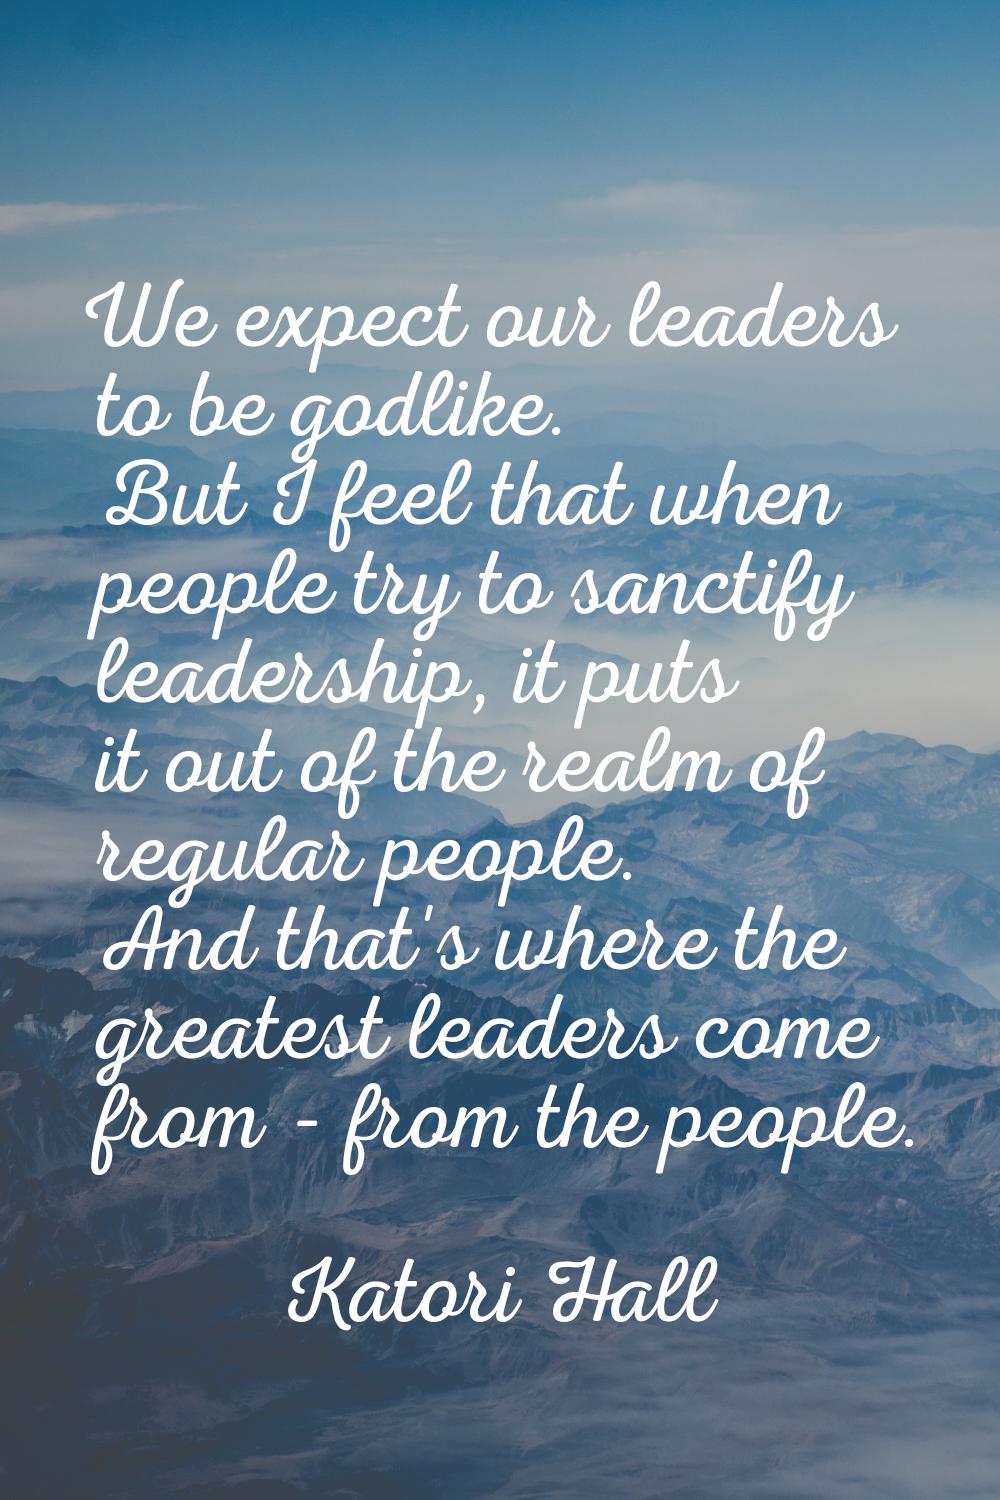 We expect our leaders to be godlike. But I feel that when people try to sanctify leadership, it put